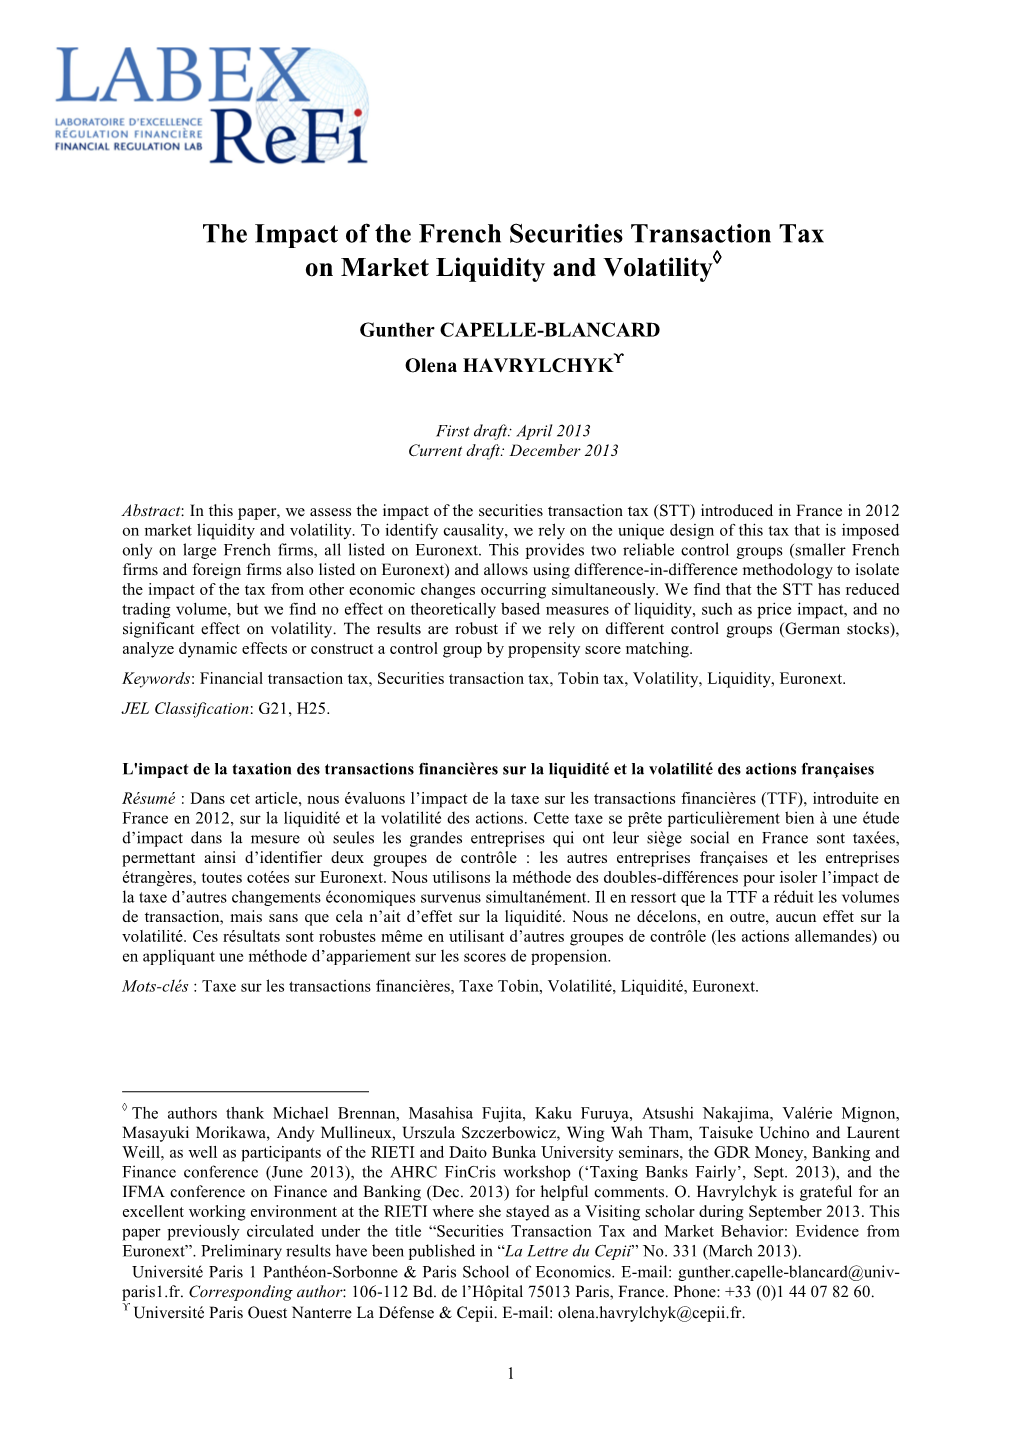 The Impact of the French Securities Transaction Tax on Market Liquidity and Volatility ◊◊◊